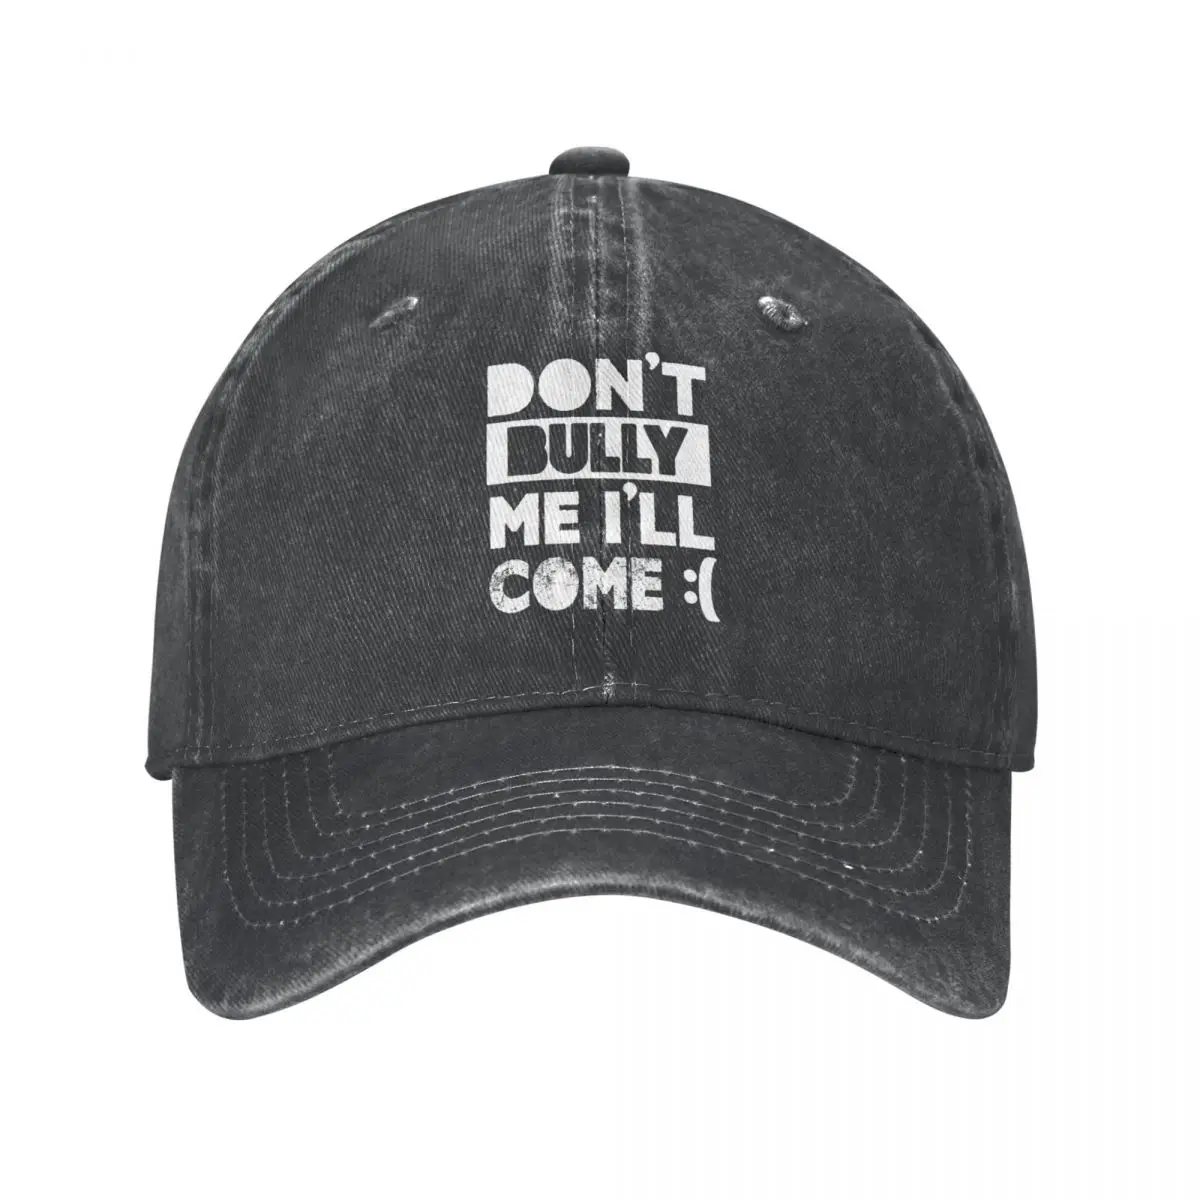 

Don't Bully Me I'll Come Men Women Baseball Cap Funny Sayings Quotes Humor Distressed Washed Caps Hat Vintage Outdoor Sun Cap